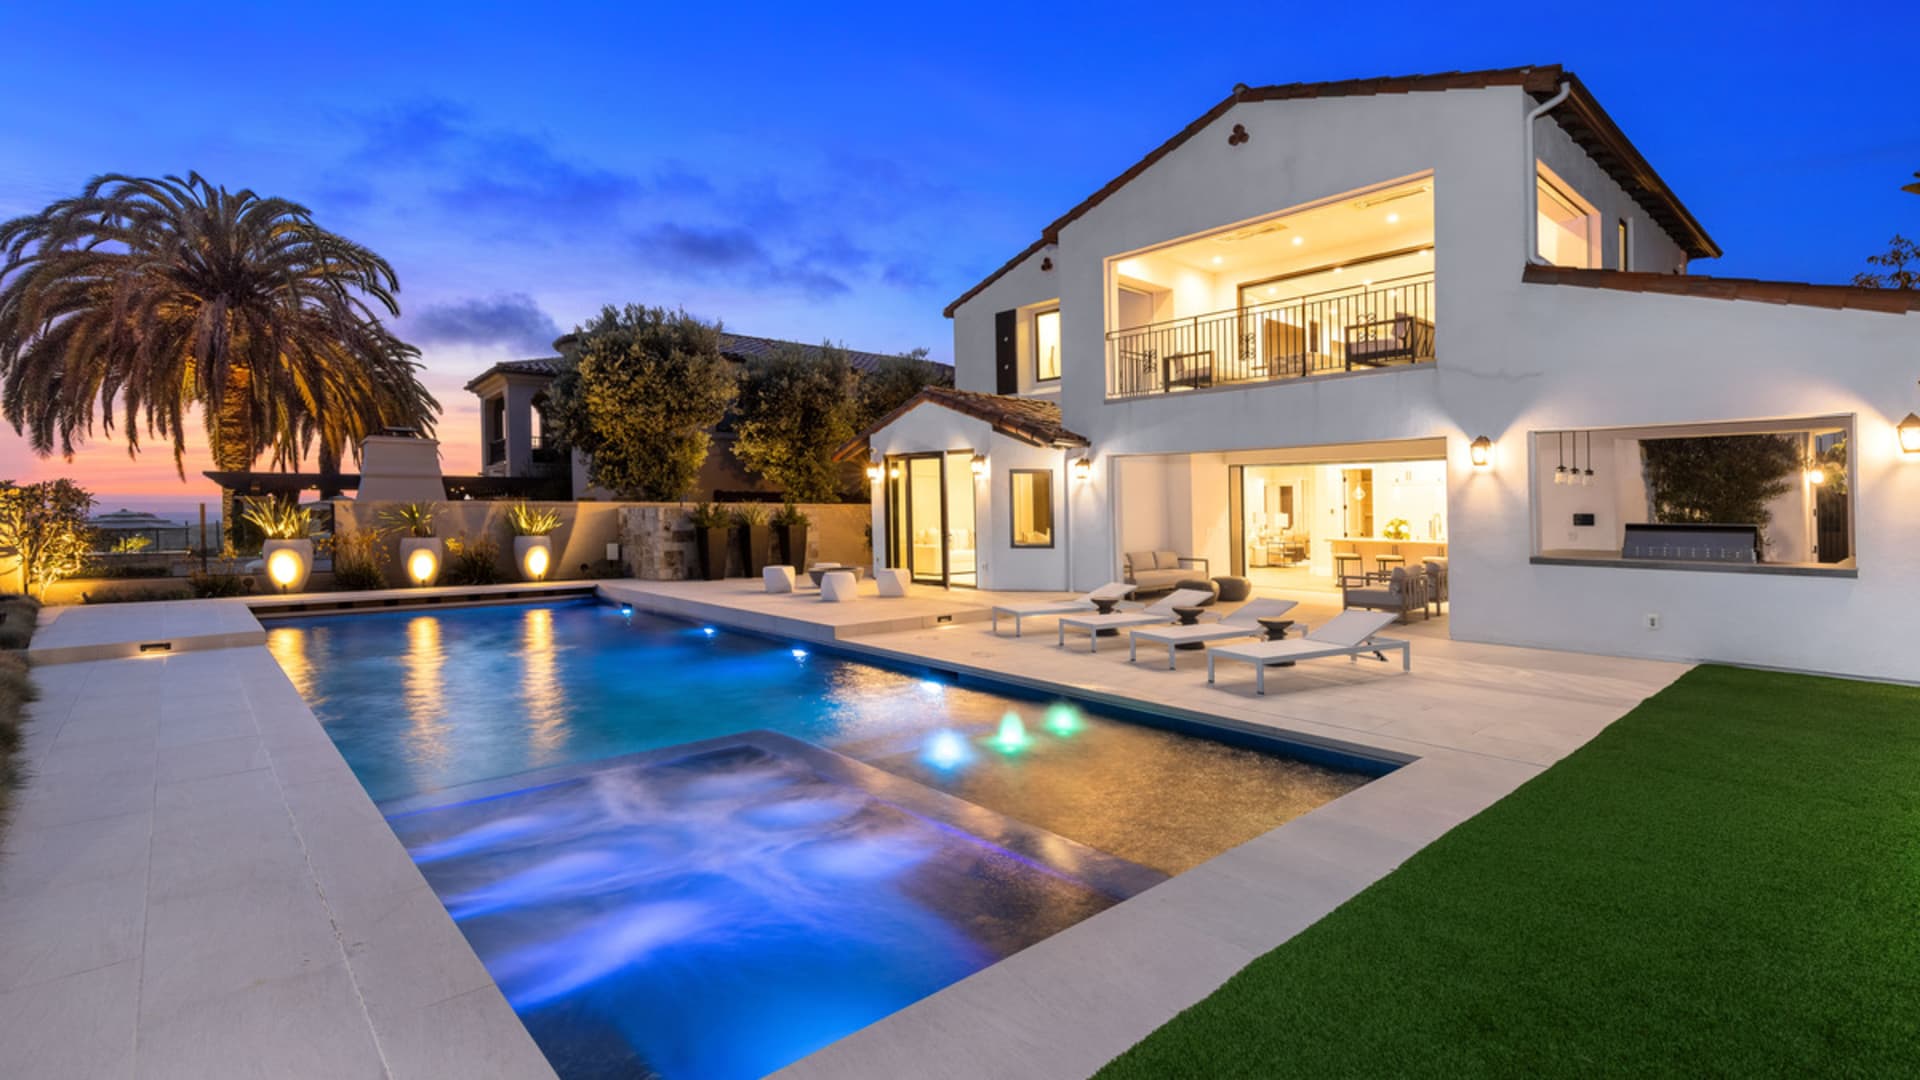 A view of the backyard at 14 Sandy Cove in Newport Beach, California.